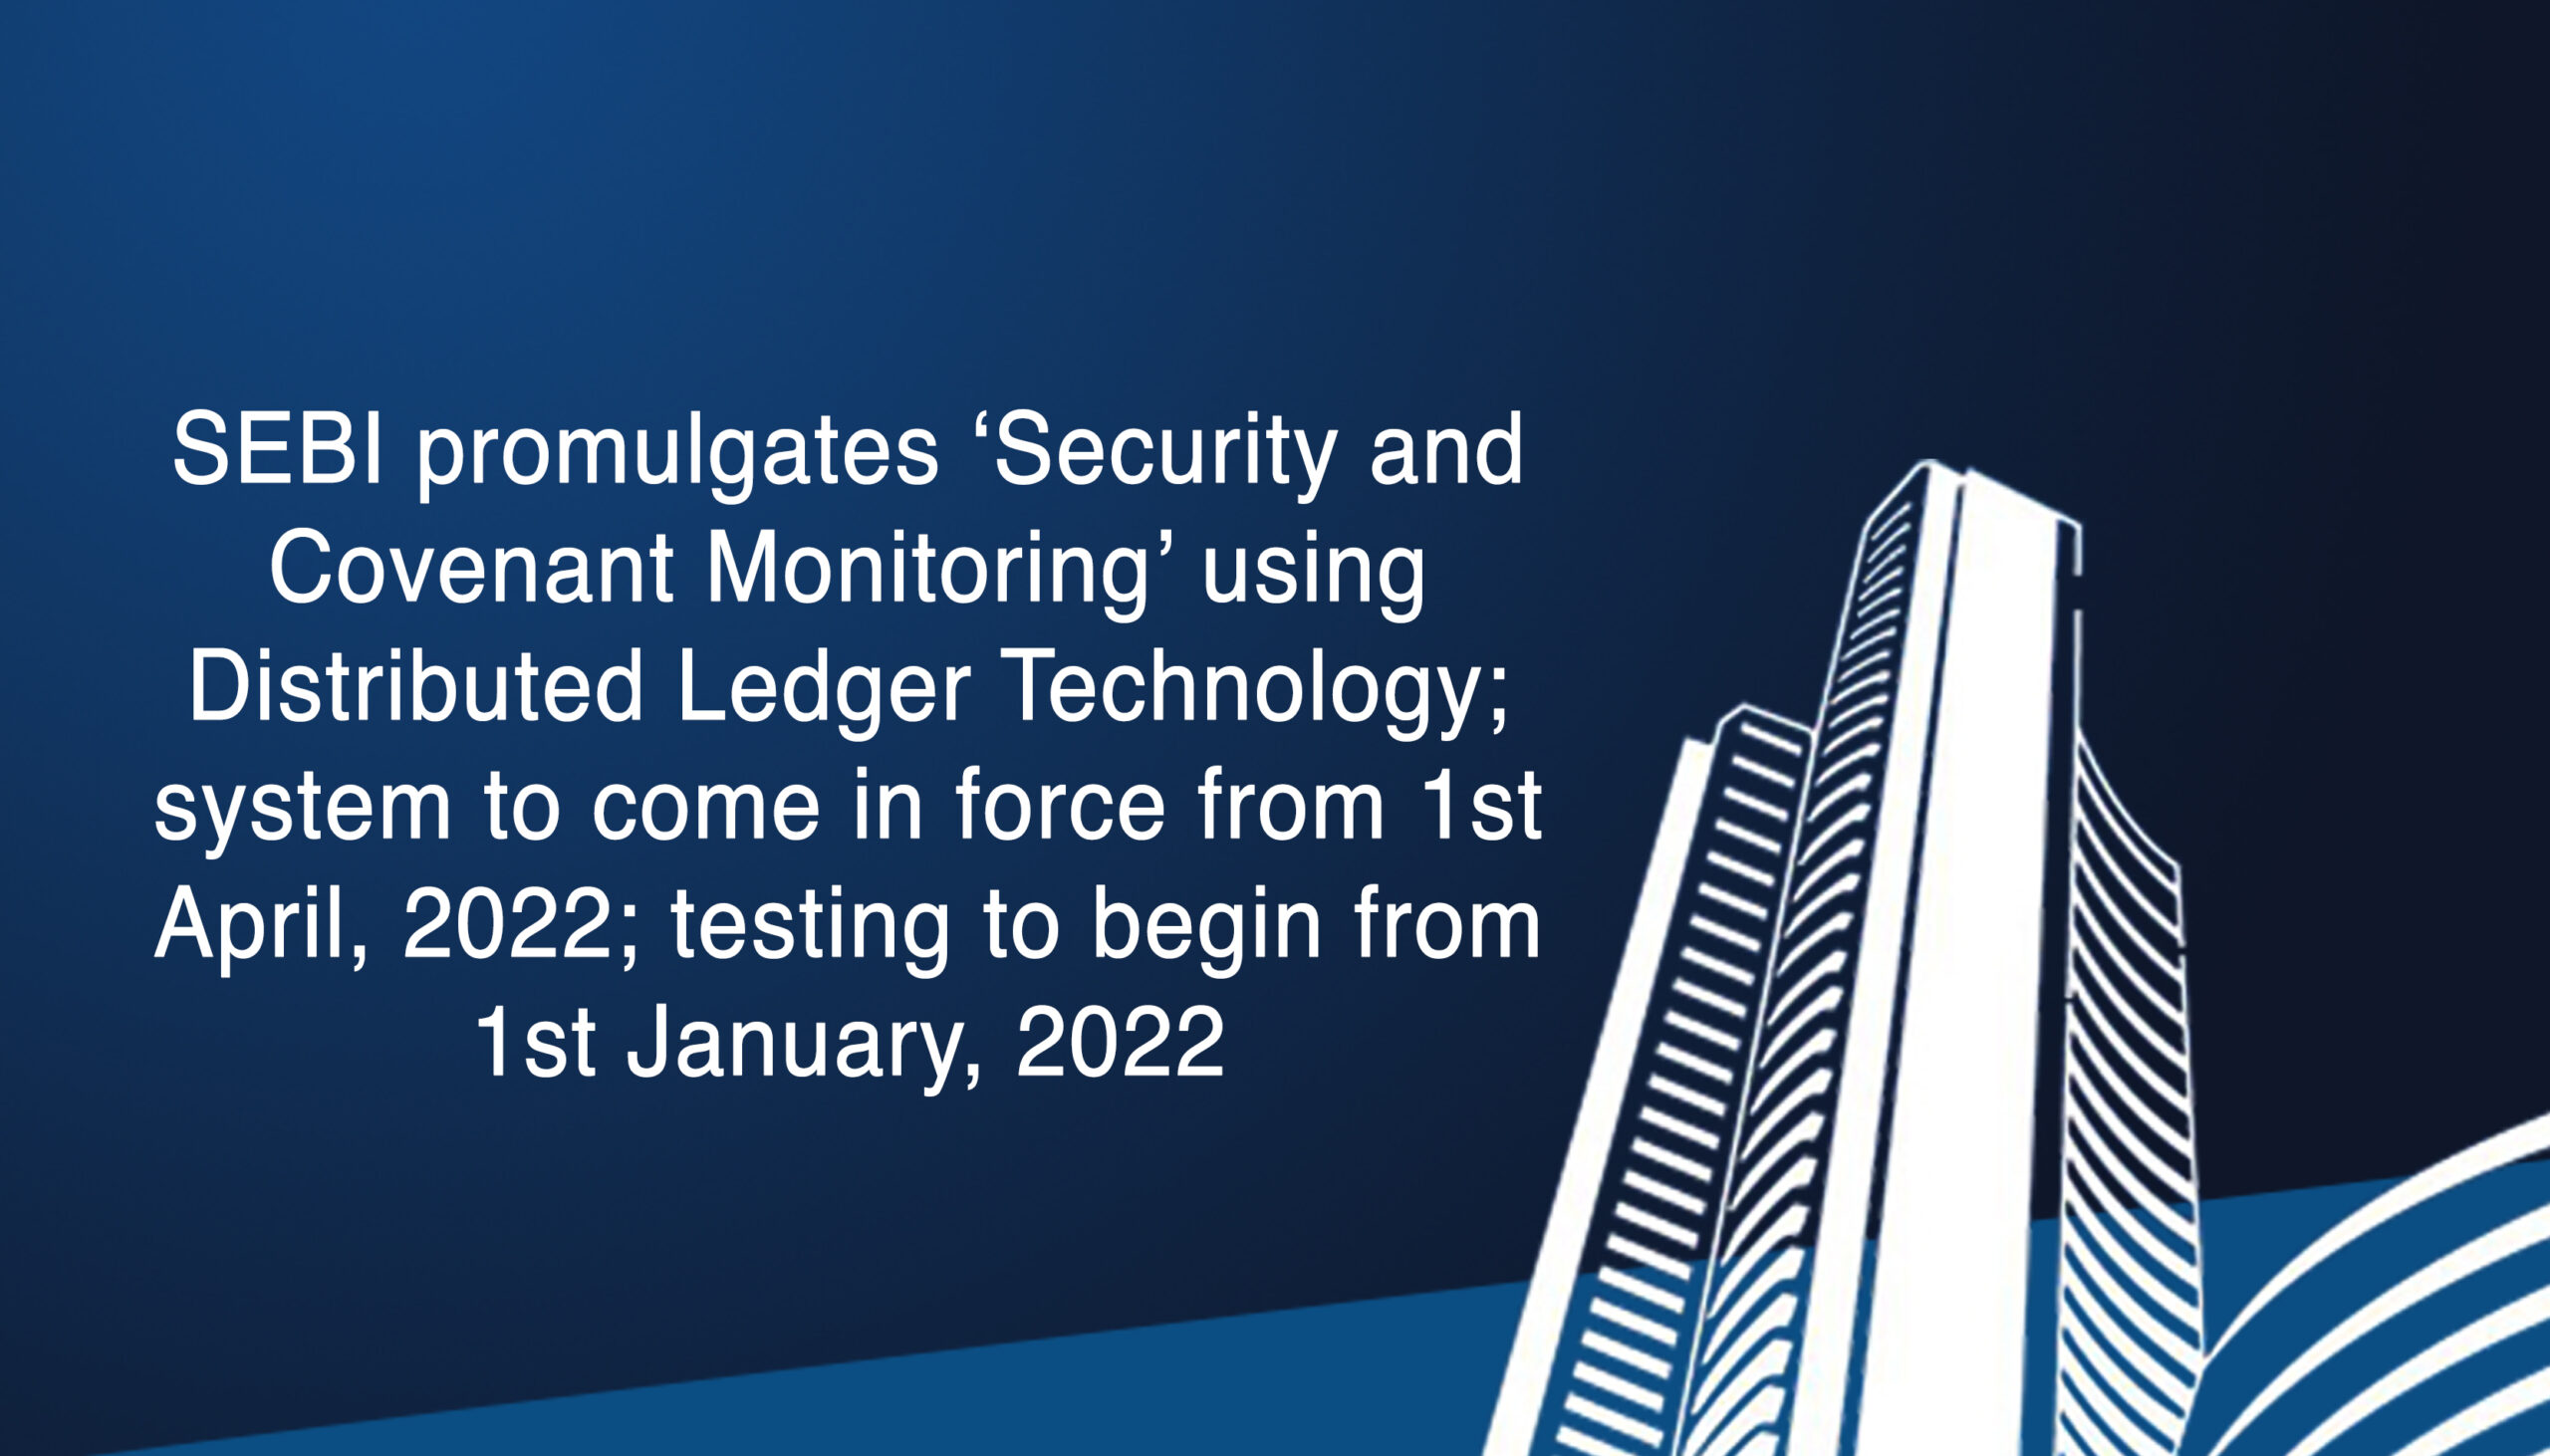 SEBI promulgates ‘Security and Covenant Monitoring’ using Distributed Ledger Technology; system to come in force from 1st April, 2022; testing to begin from 1st January, 2022